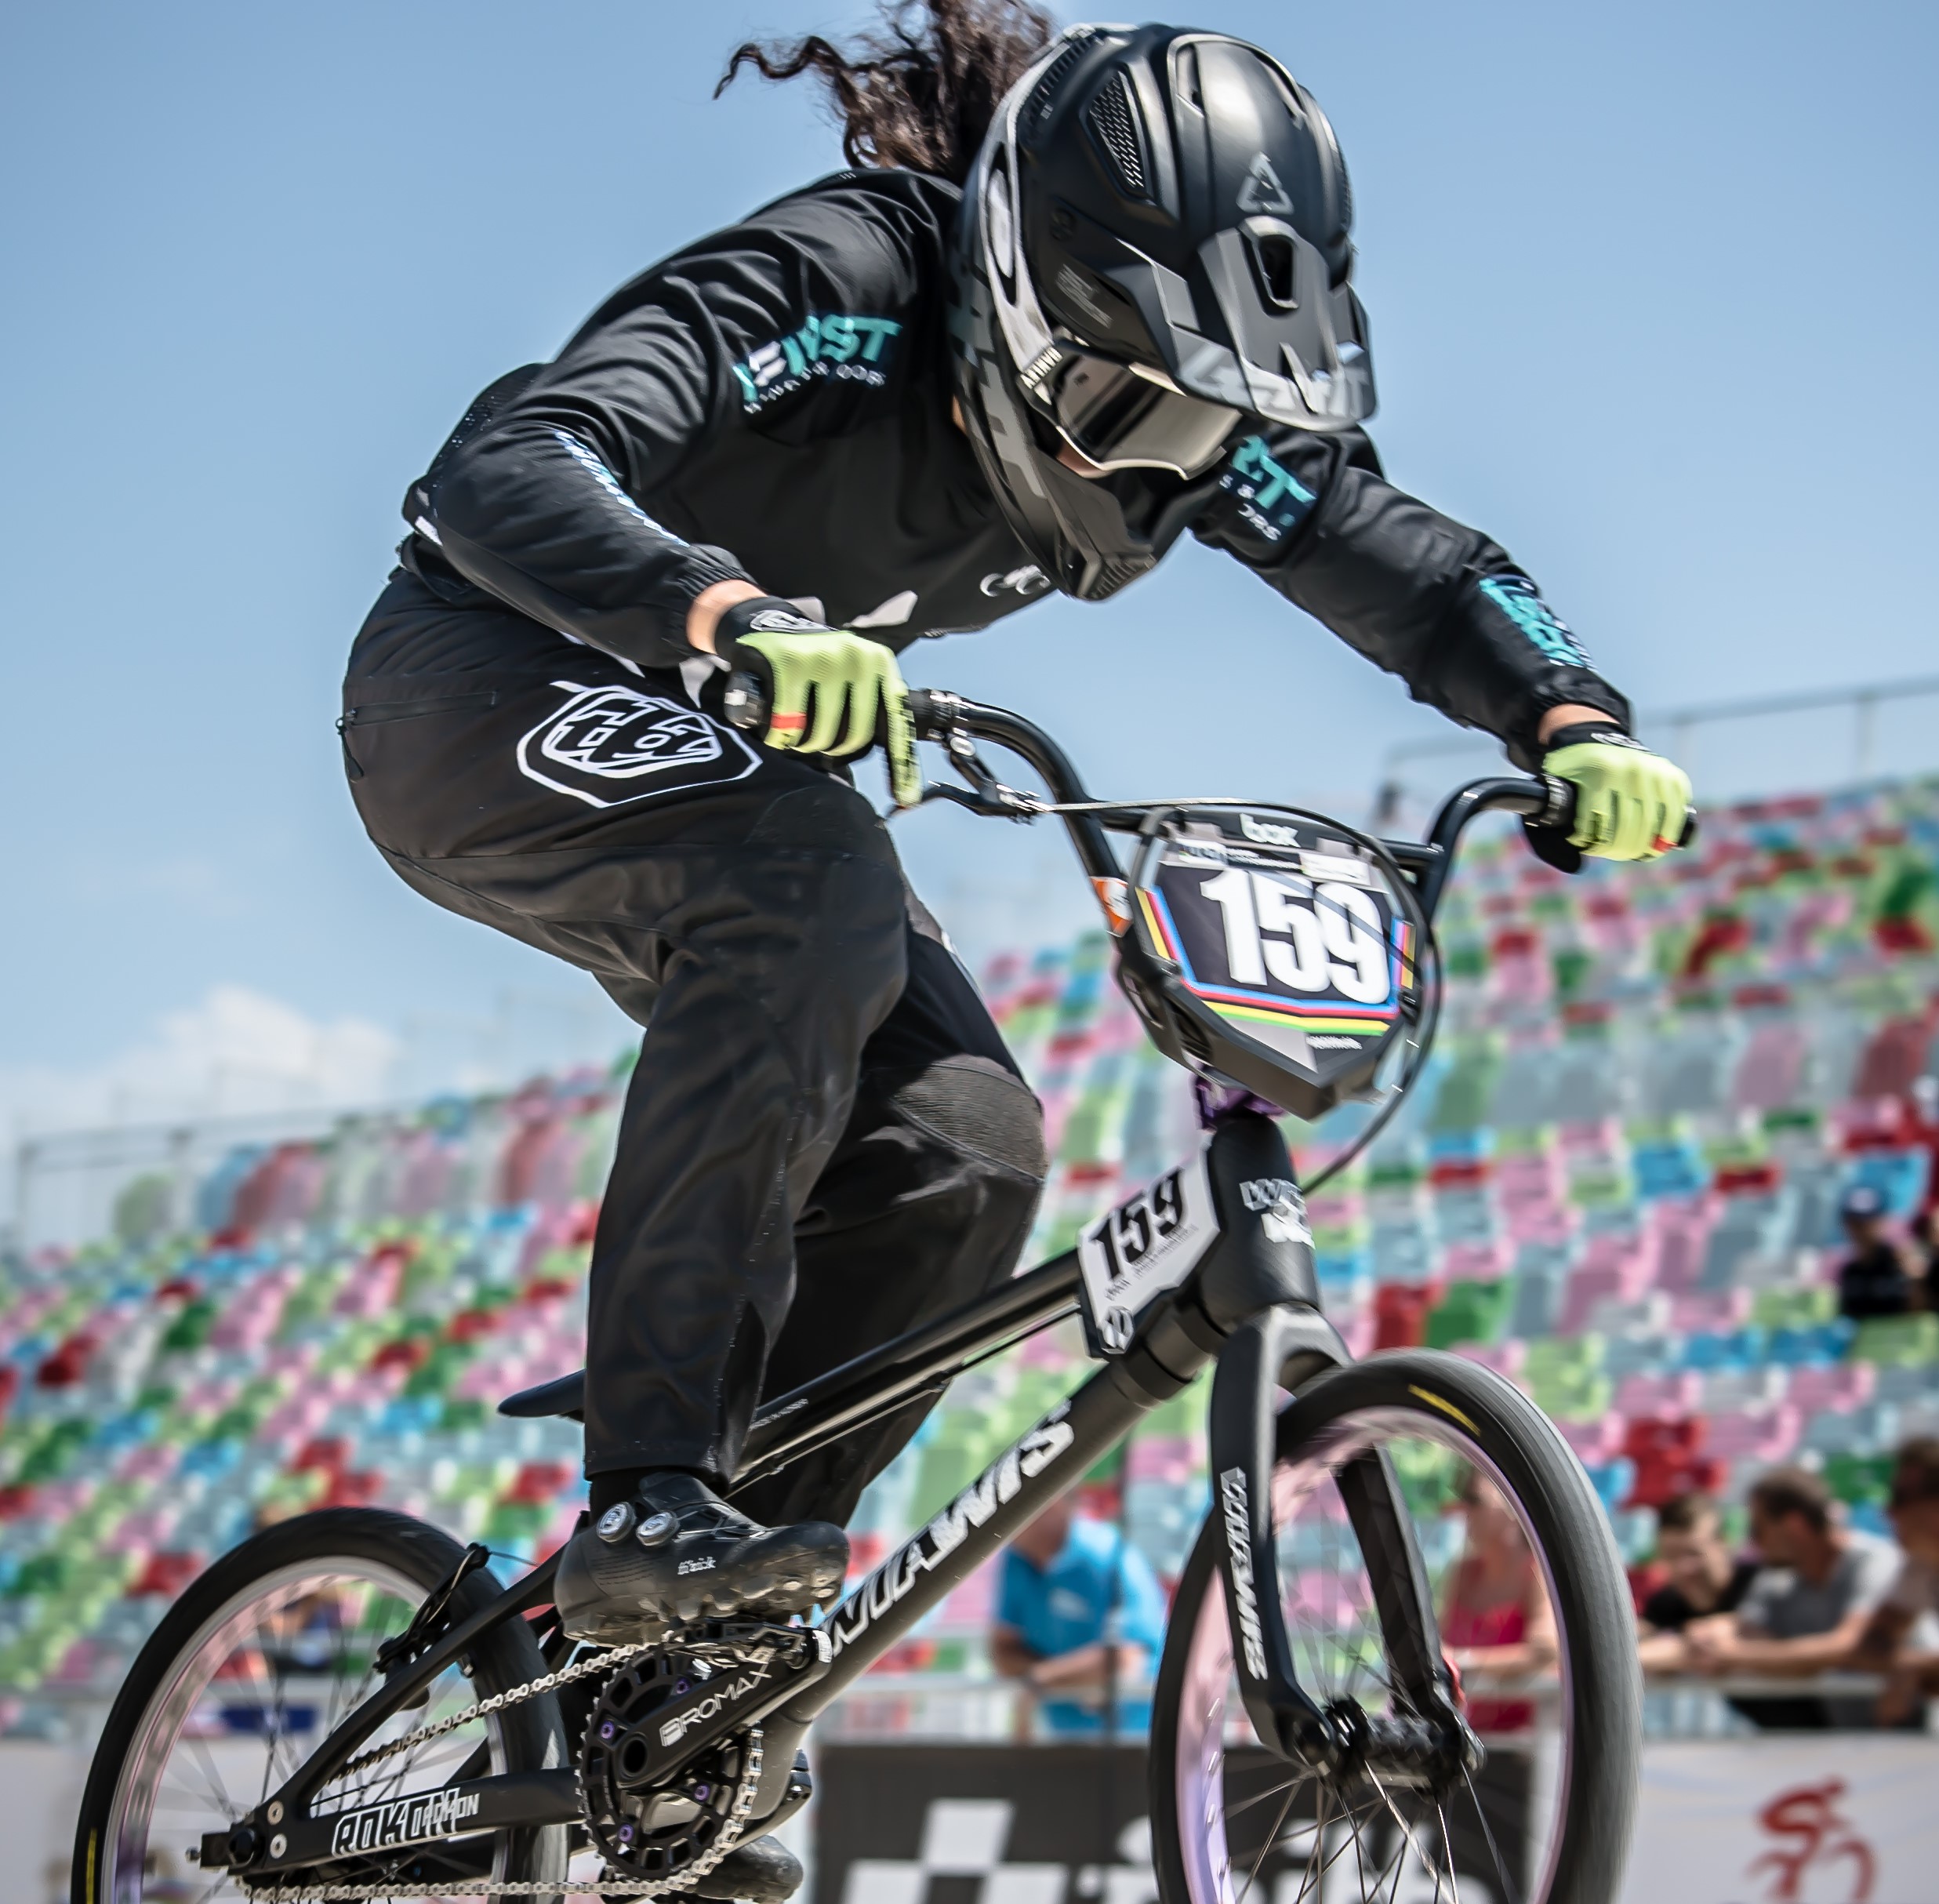 group champion cyclists compete at Youth Olympic Games - BMX .NET.NZ